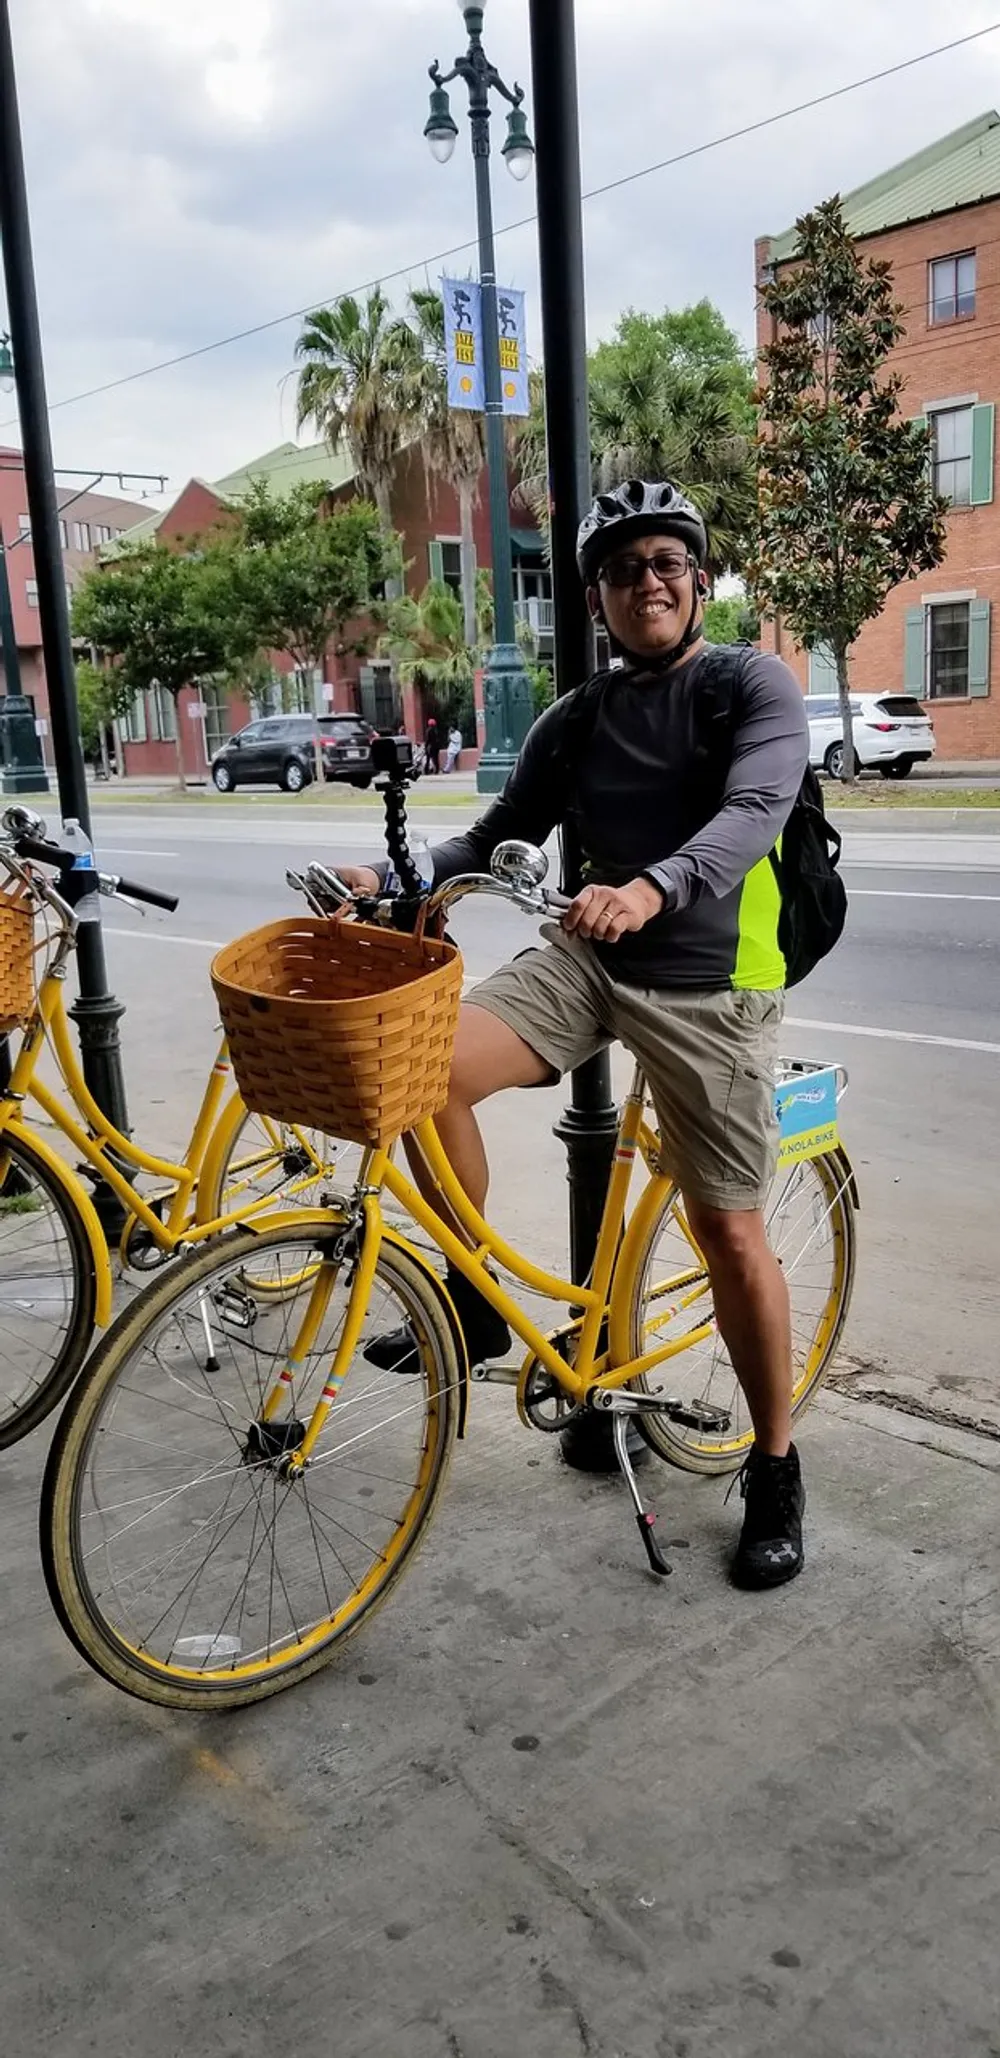 A person wearing a helmet and sunglasses is smiling at the camera while straddling a yellow rental bicycle with a basket in an urban setting near a tramway line